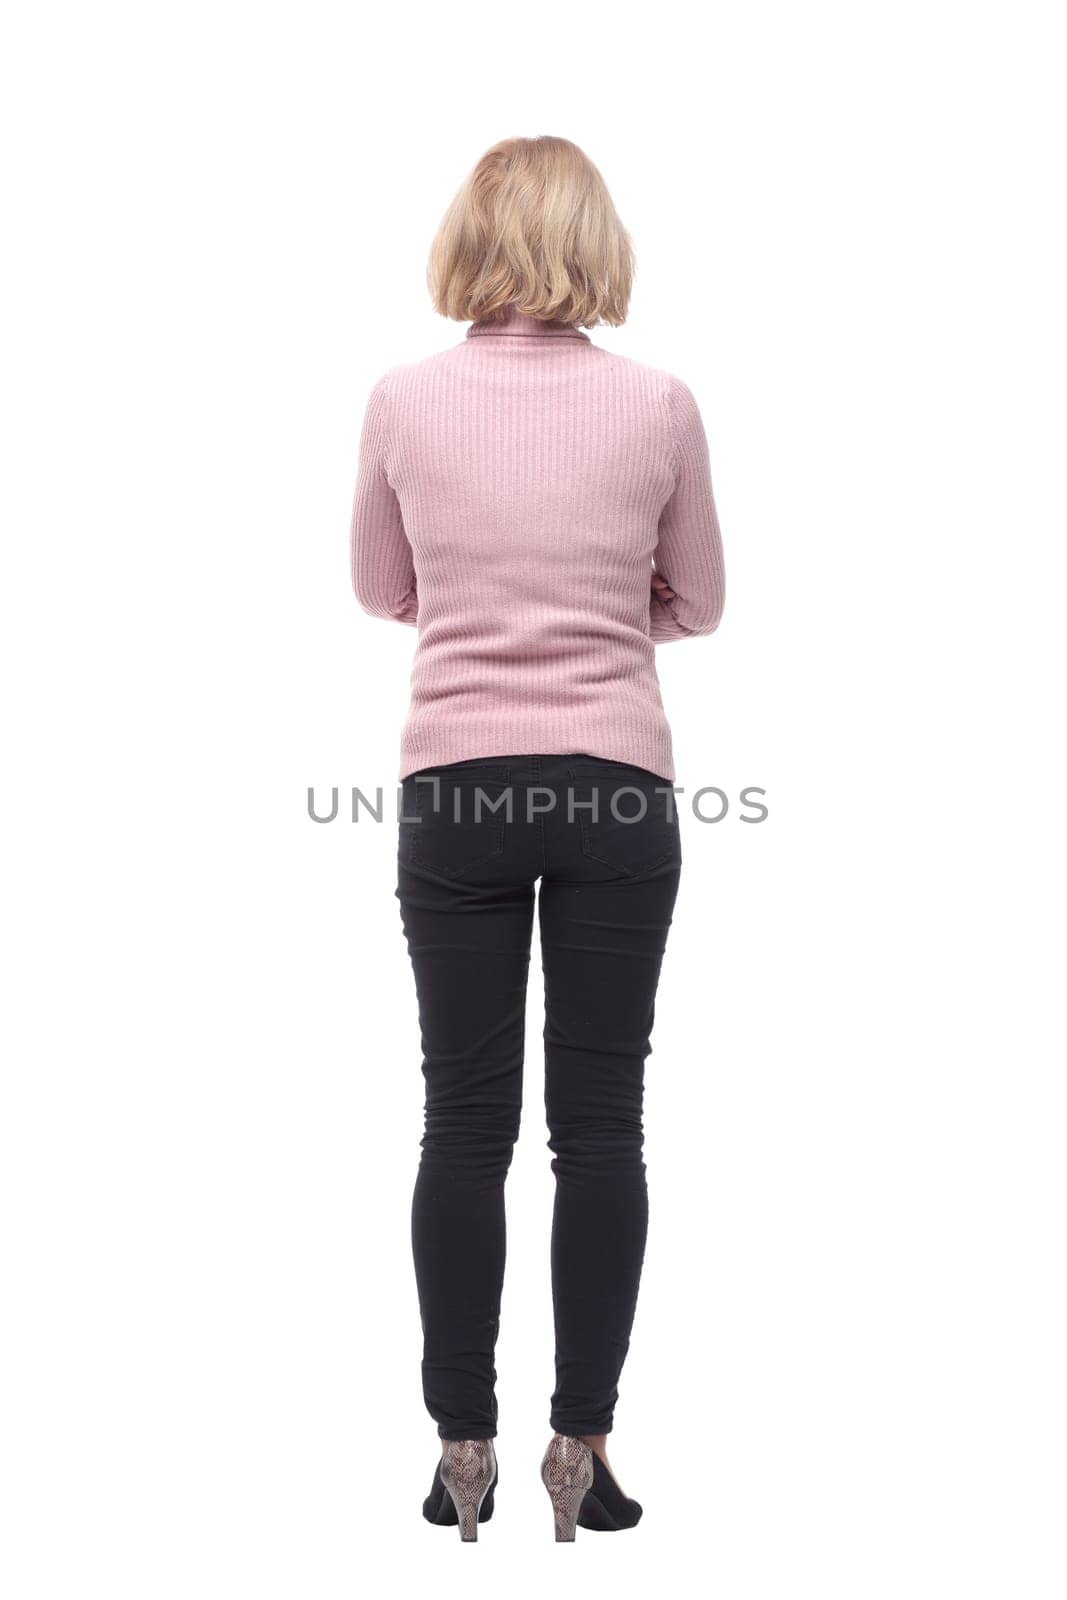 Back view of standing blonde woman in jeans and sweater isolated on white background